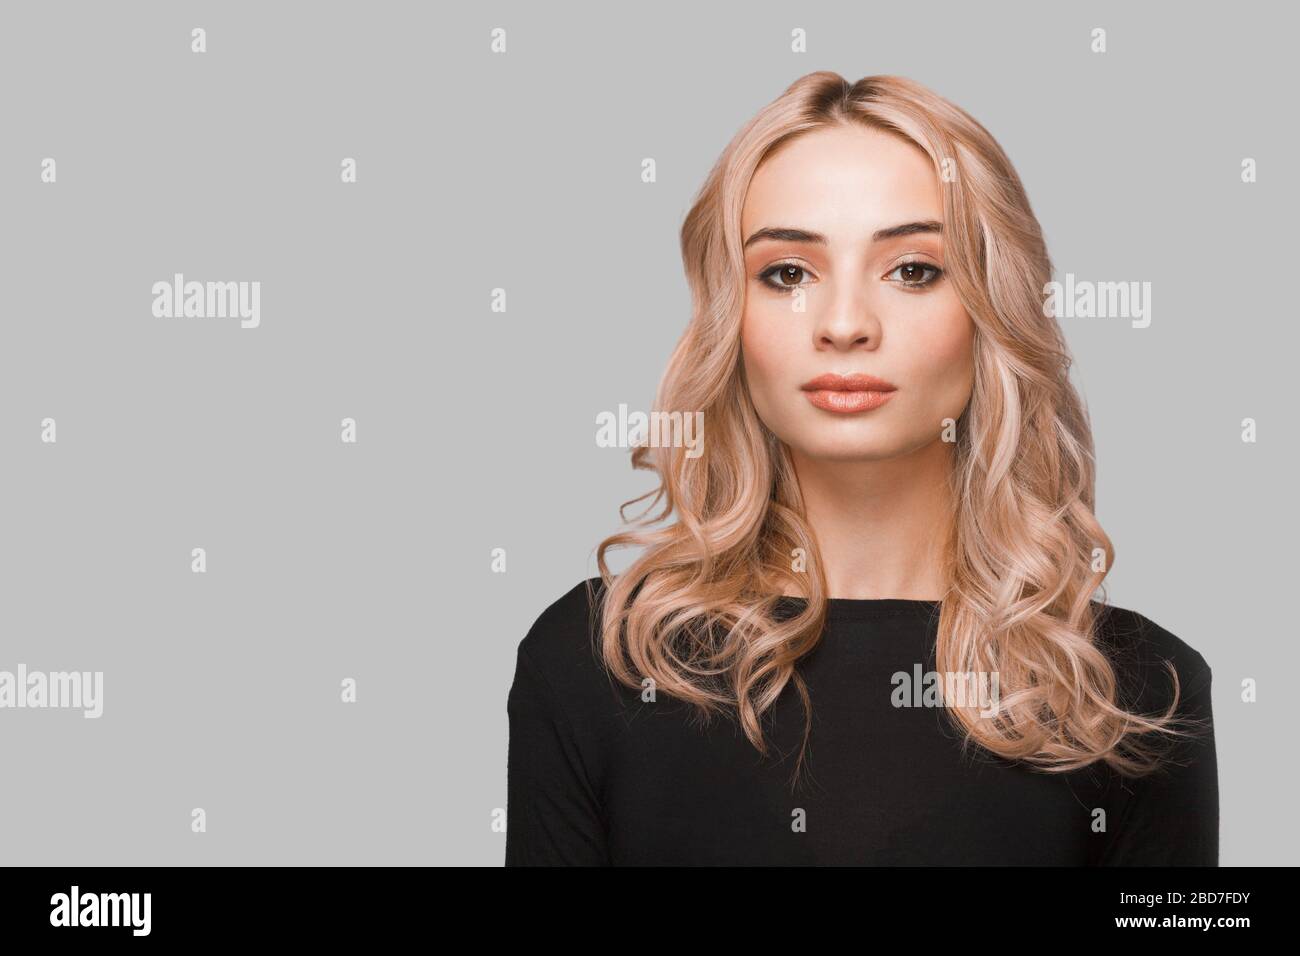 Portrait of a young caucasian woman with flowing hair. Stock Photo